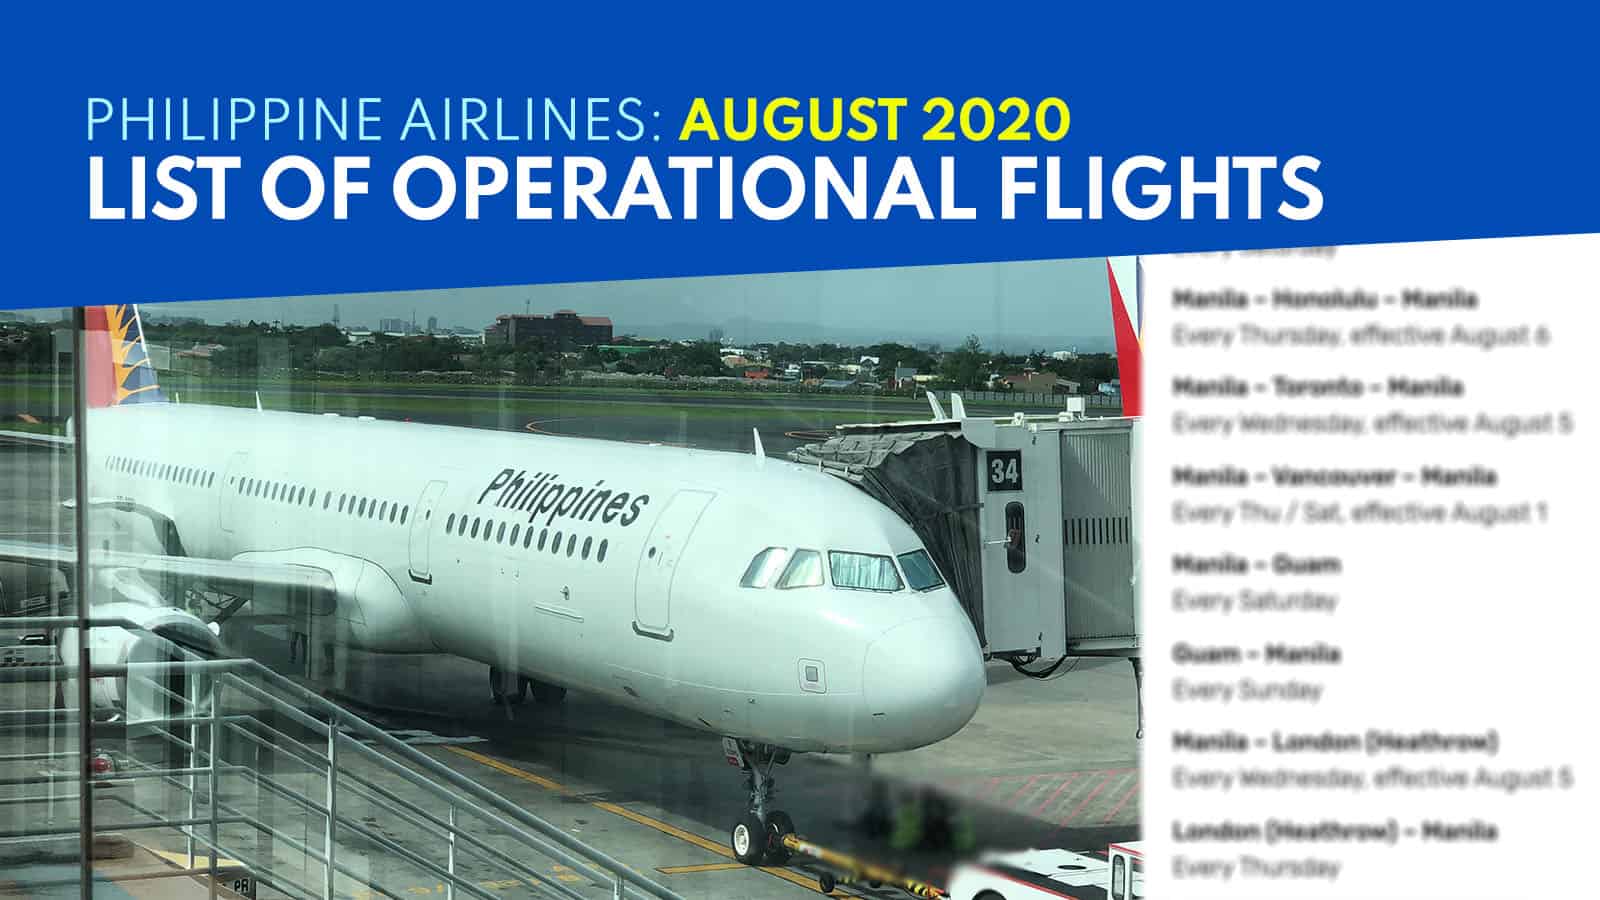 PHILIPPINE AIRLINES: List of Operational Flights starting AUGUST 19, 2020